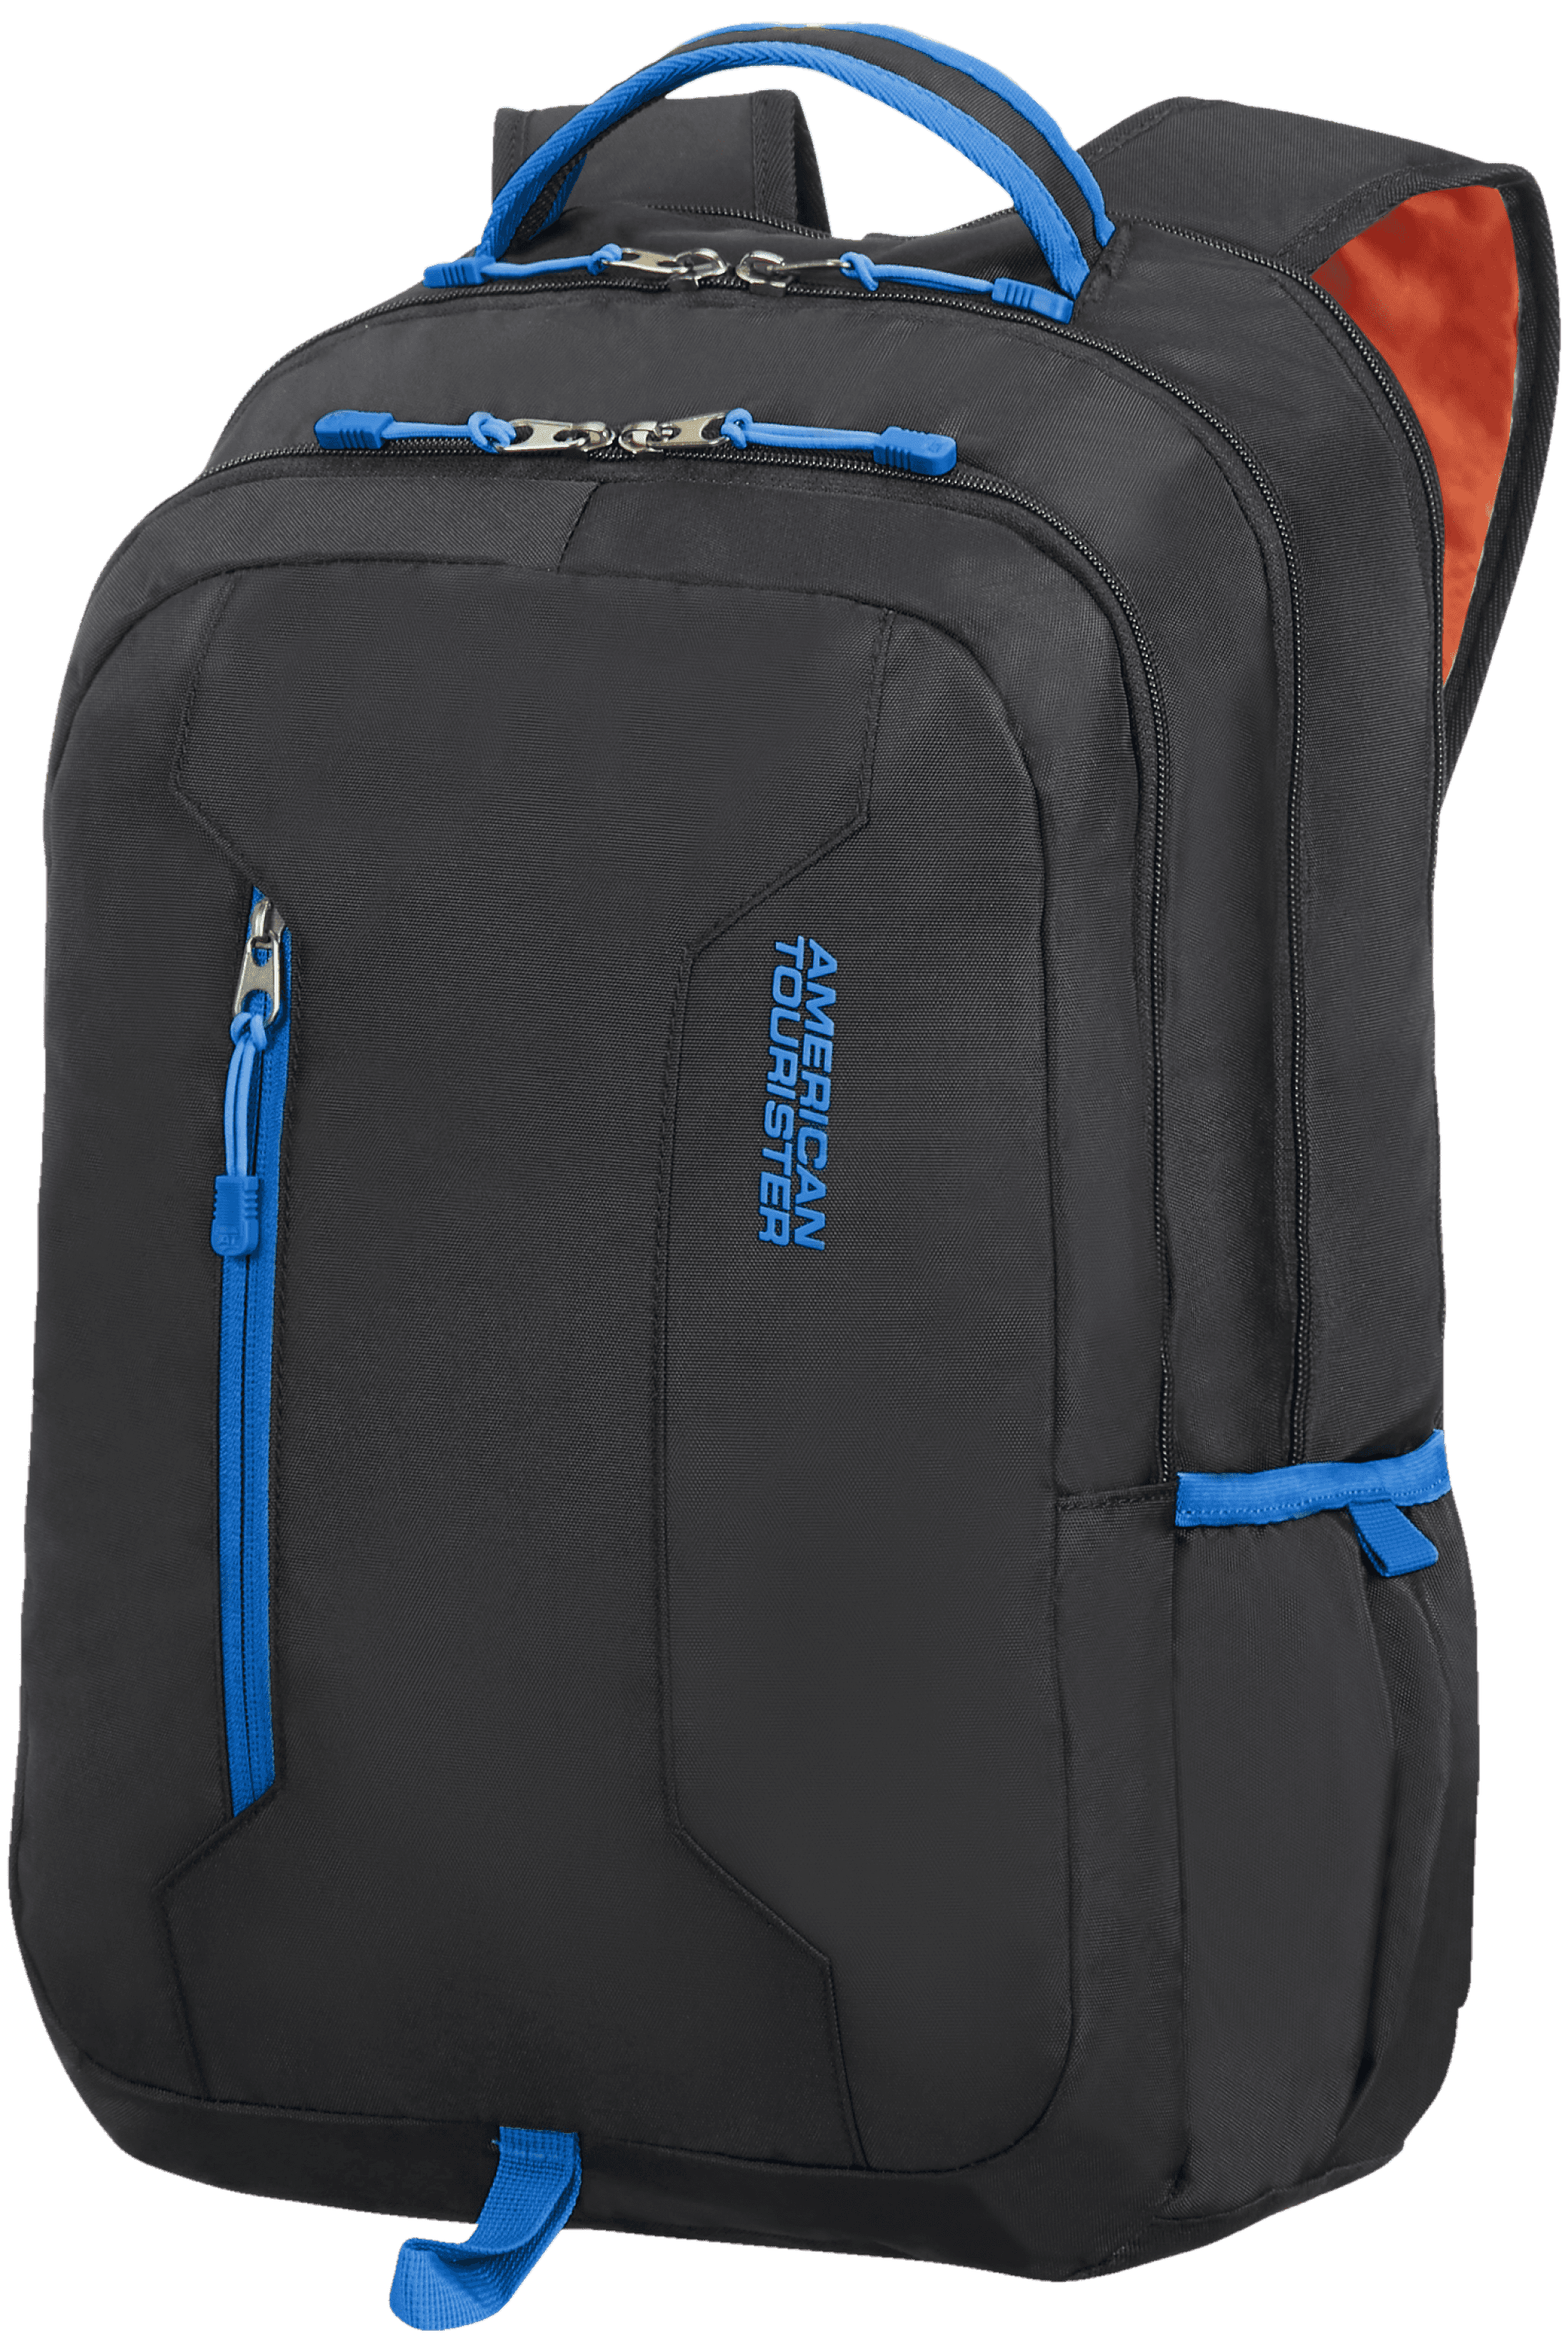 Buy American Tourister Backpack Online Kuwait